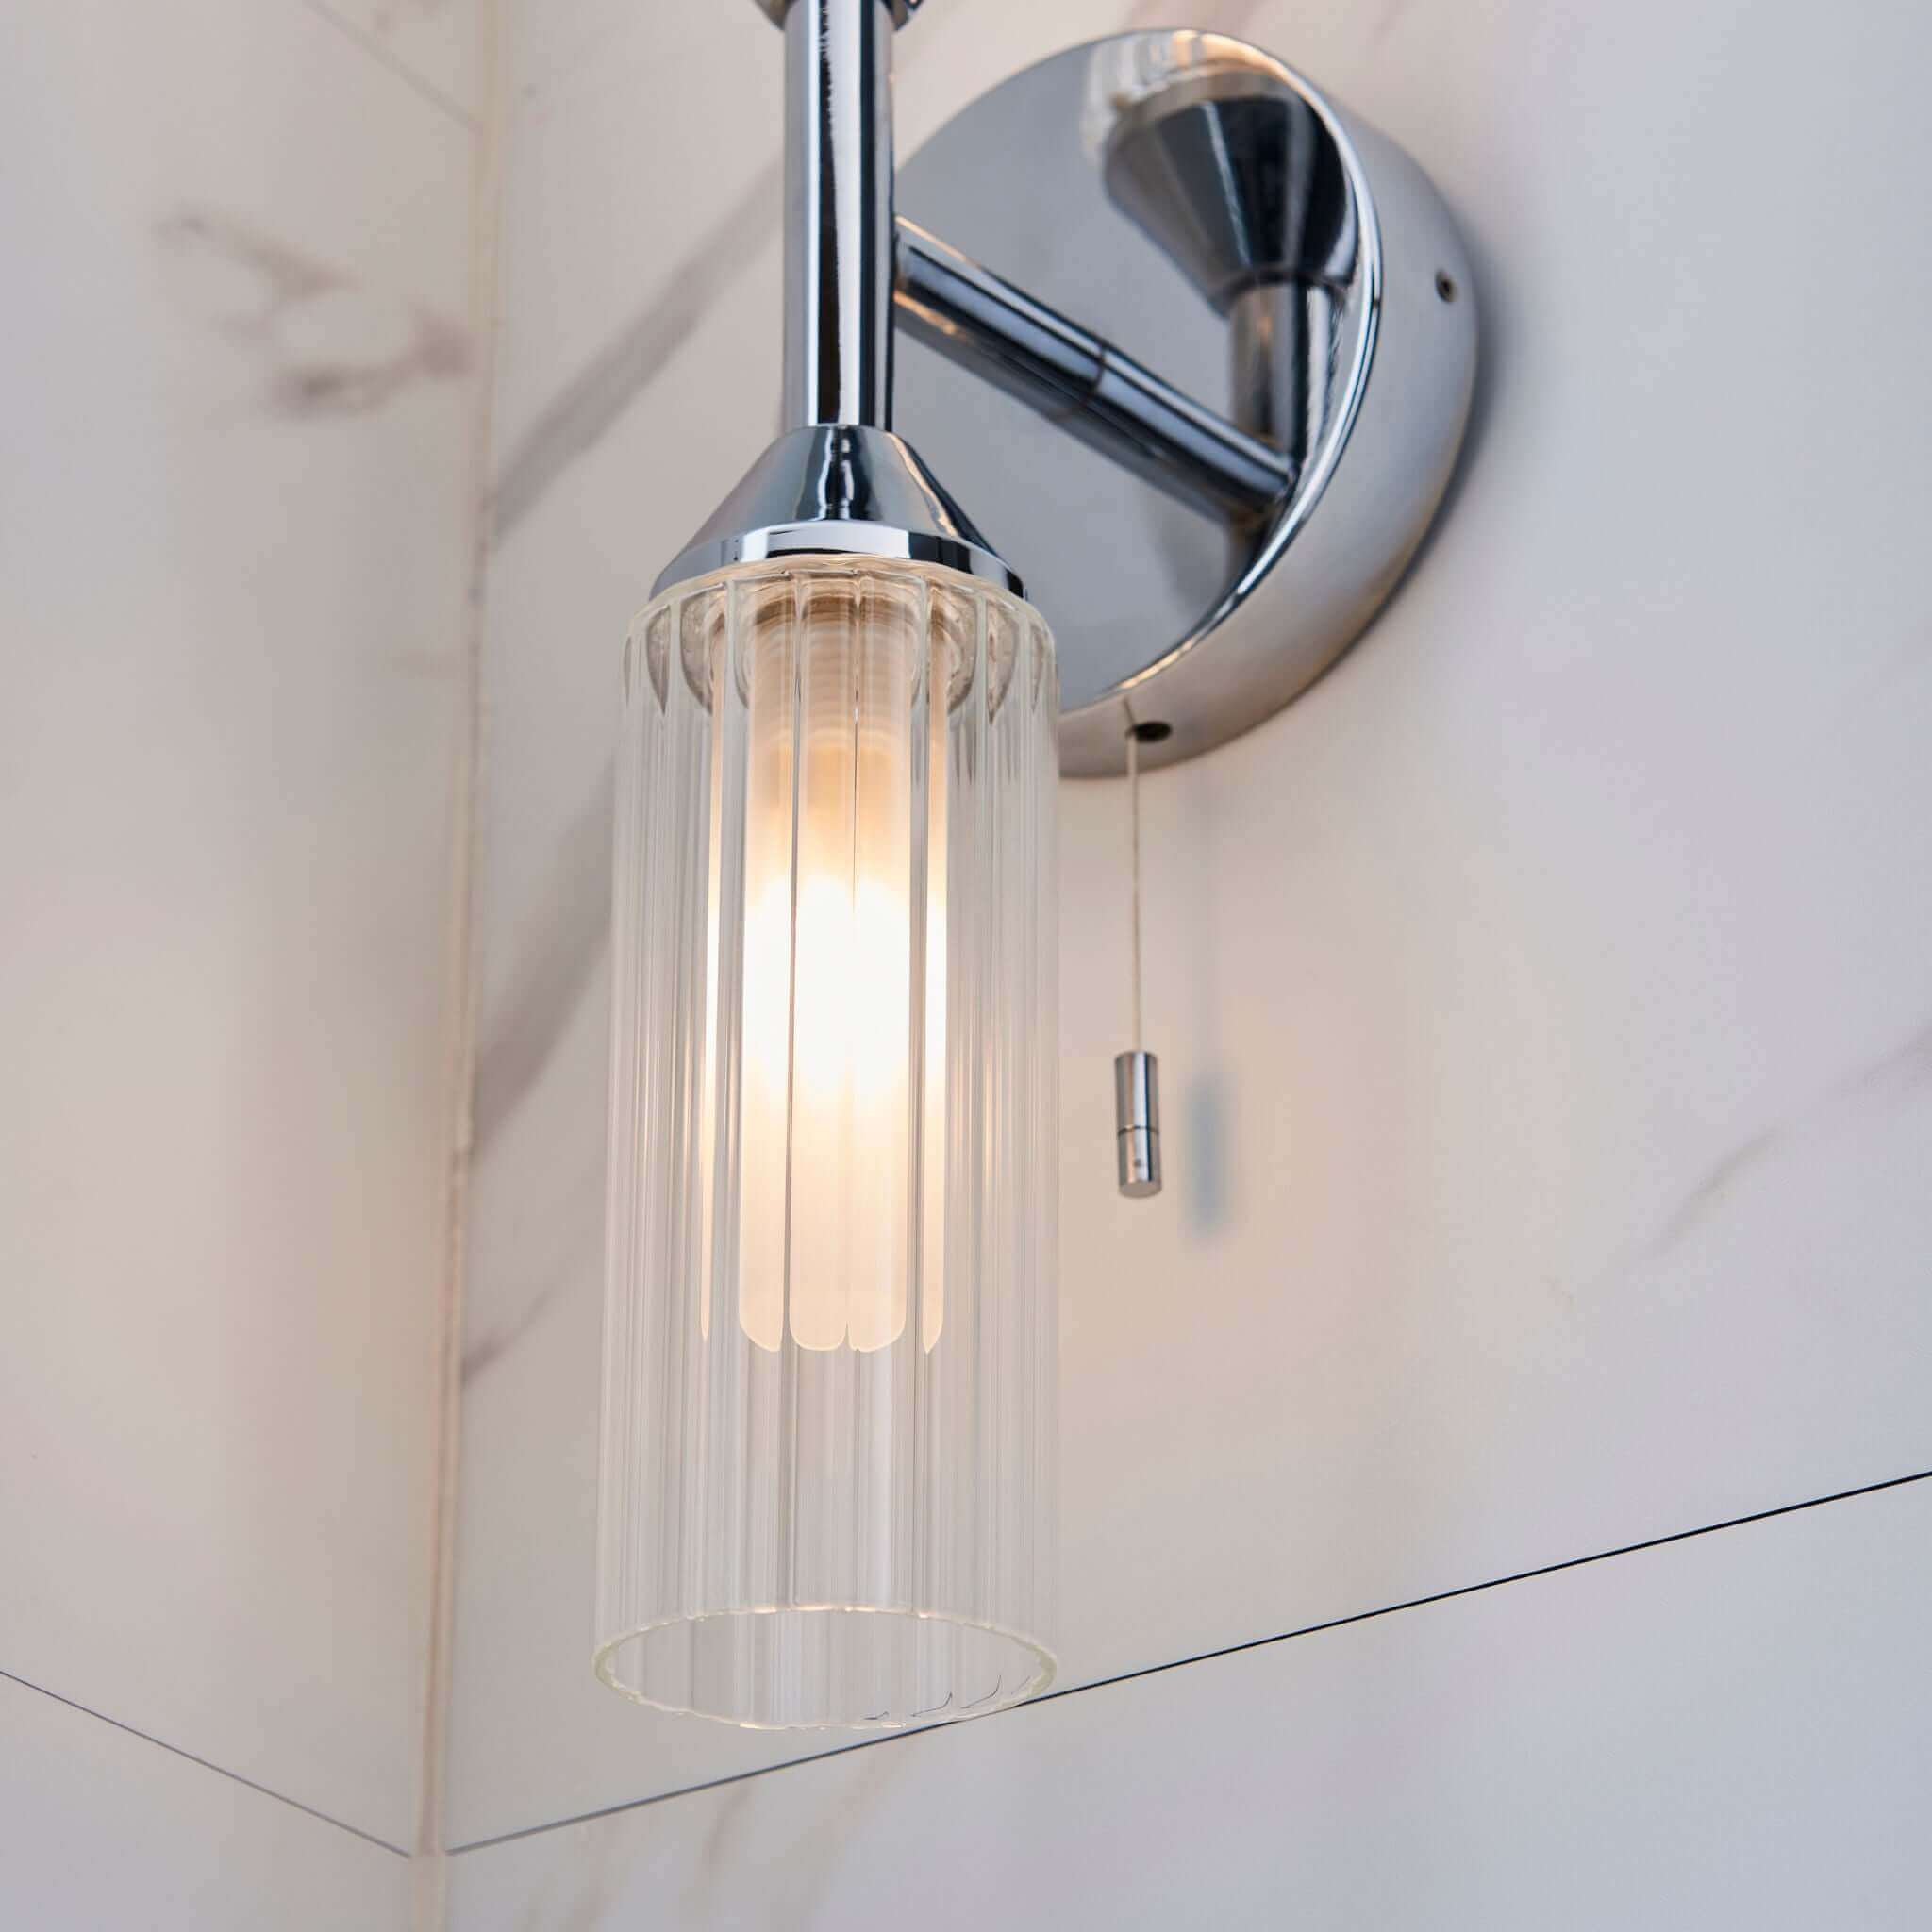 Elier Bathroom Two Light Wall Sconce - escapologyhome.co.uk